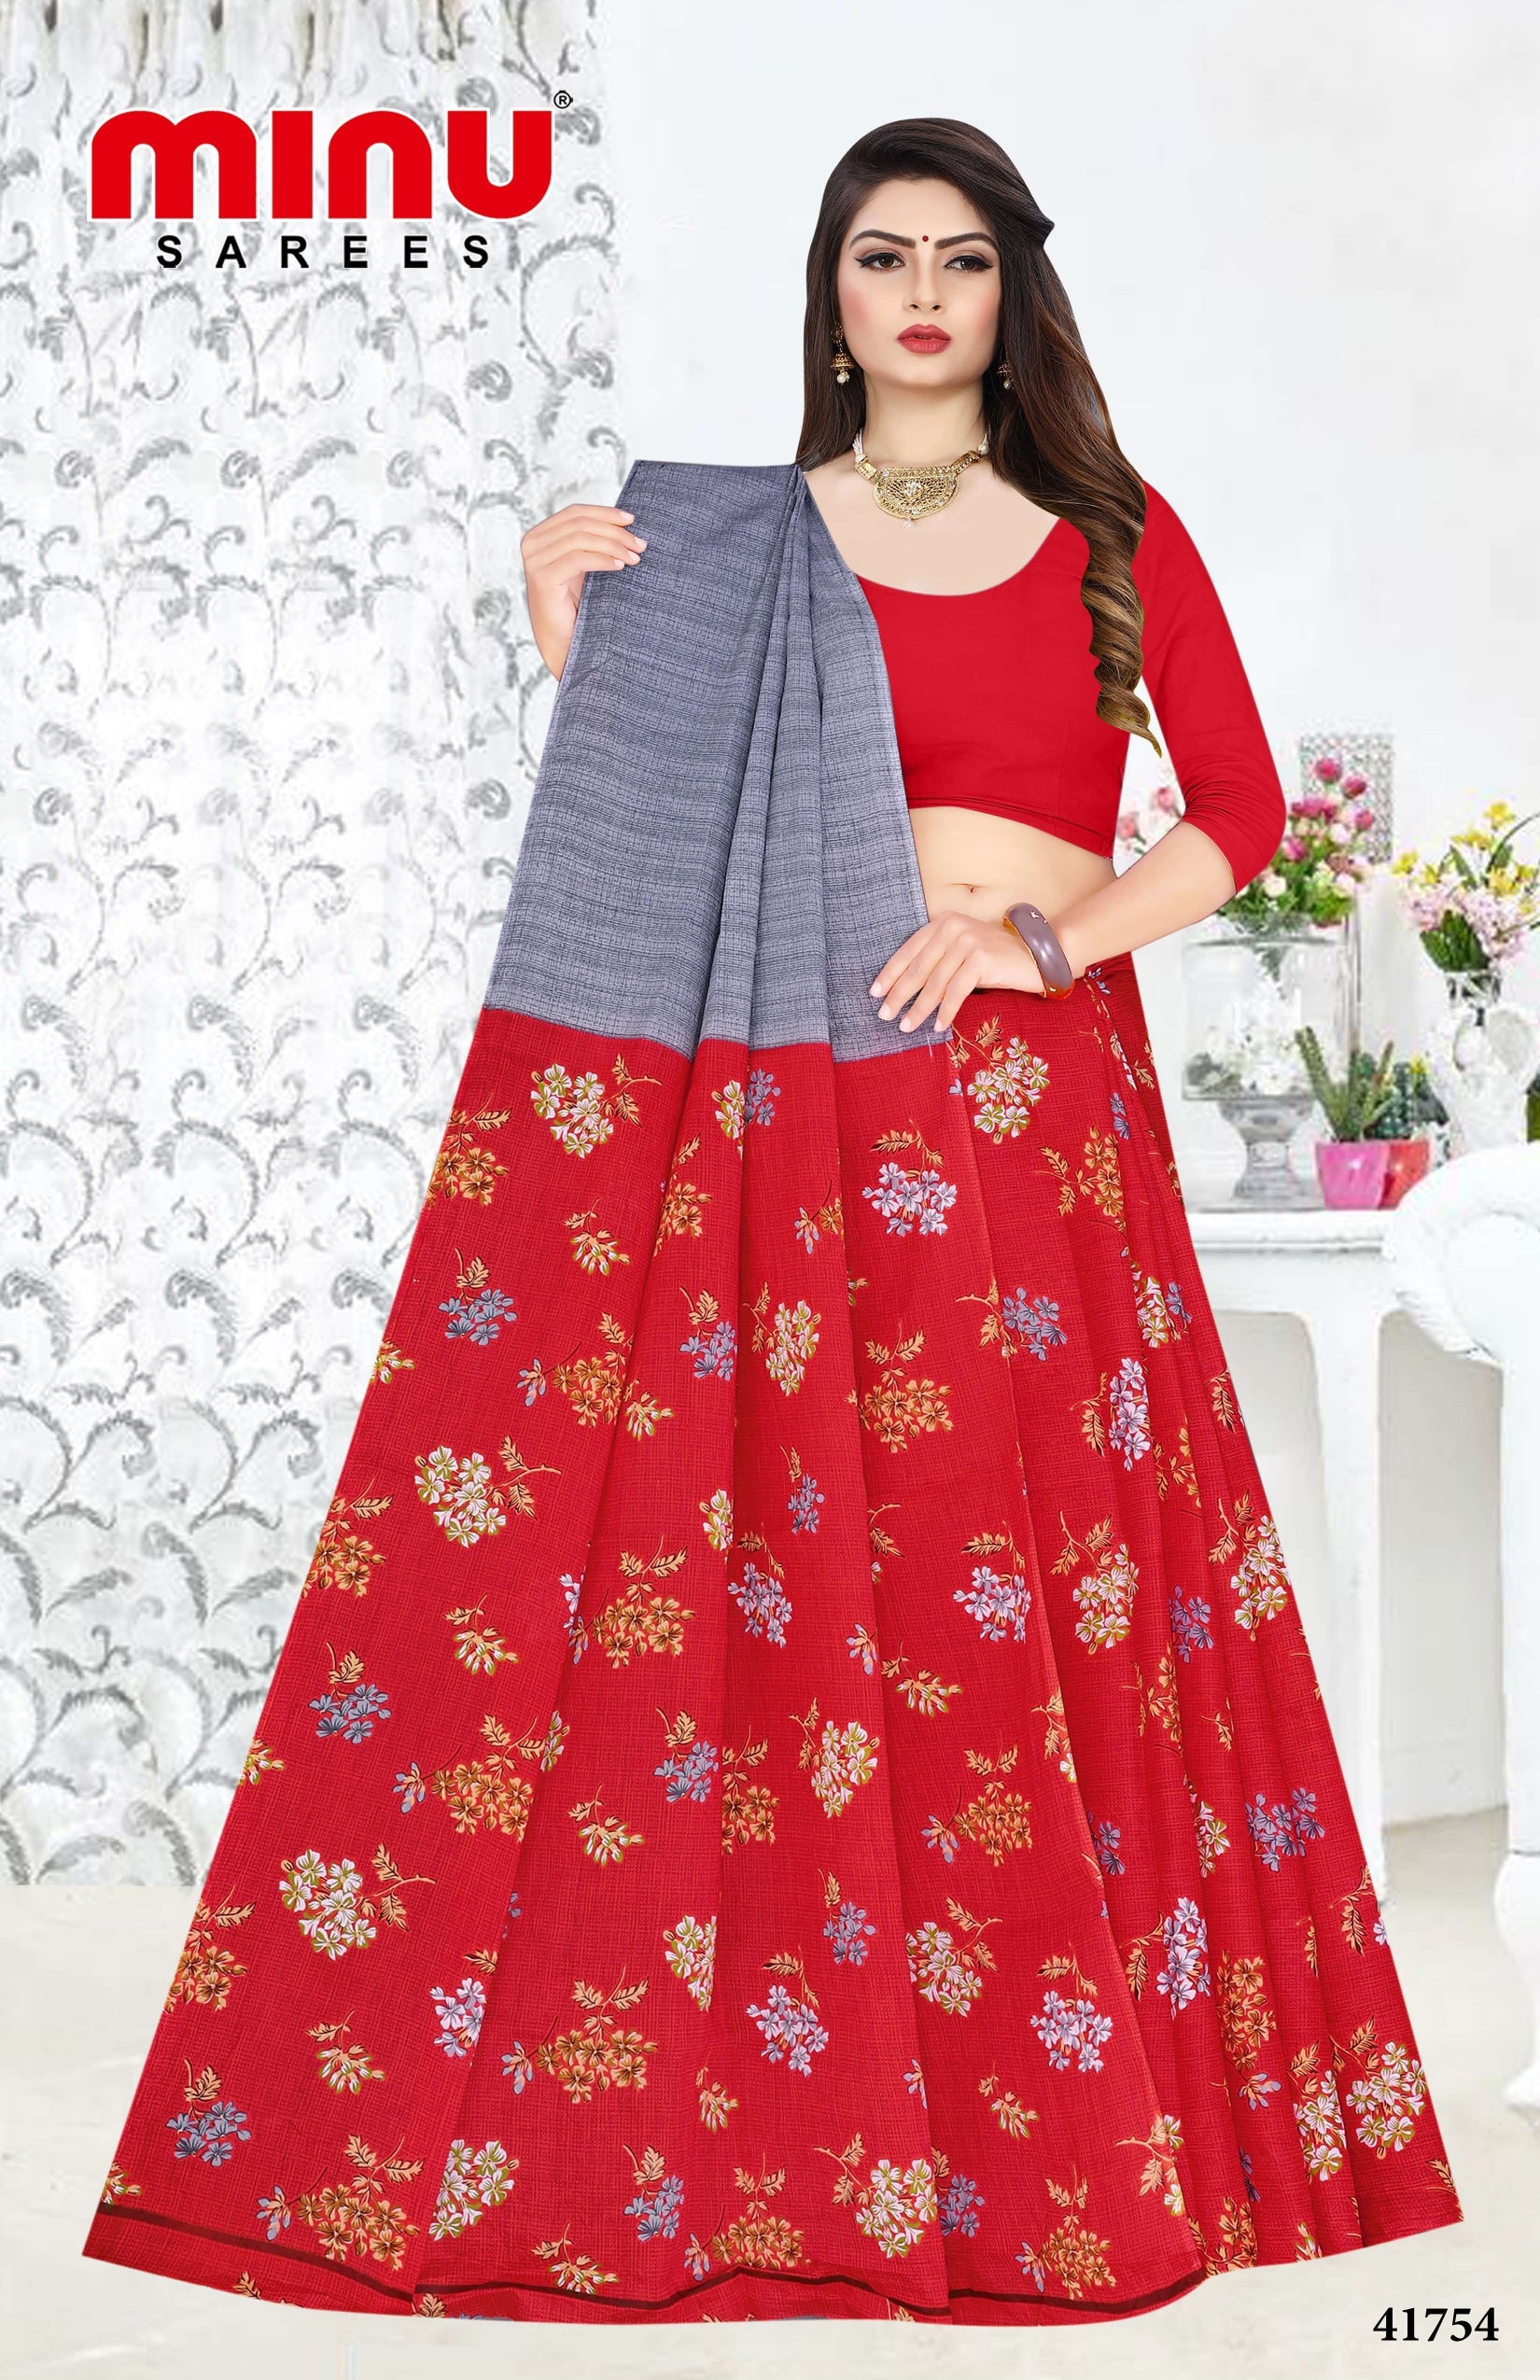 online printed saree with red printed designs